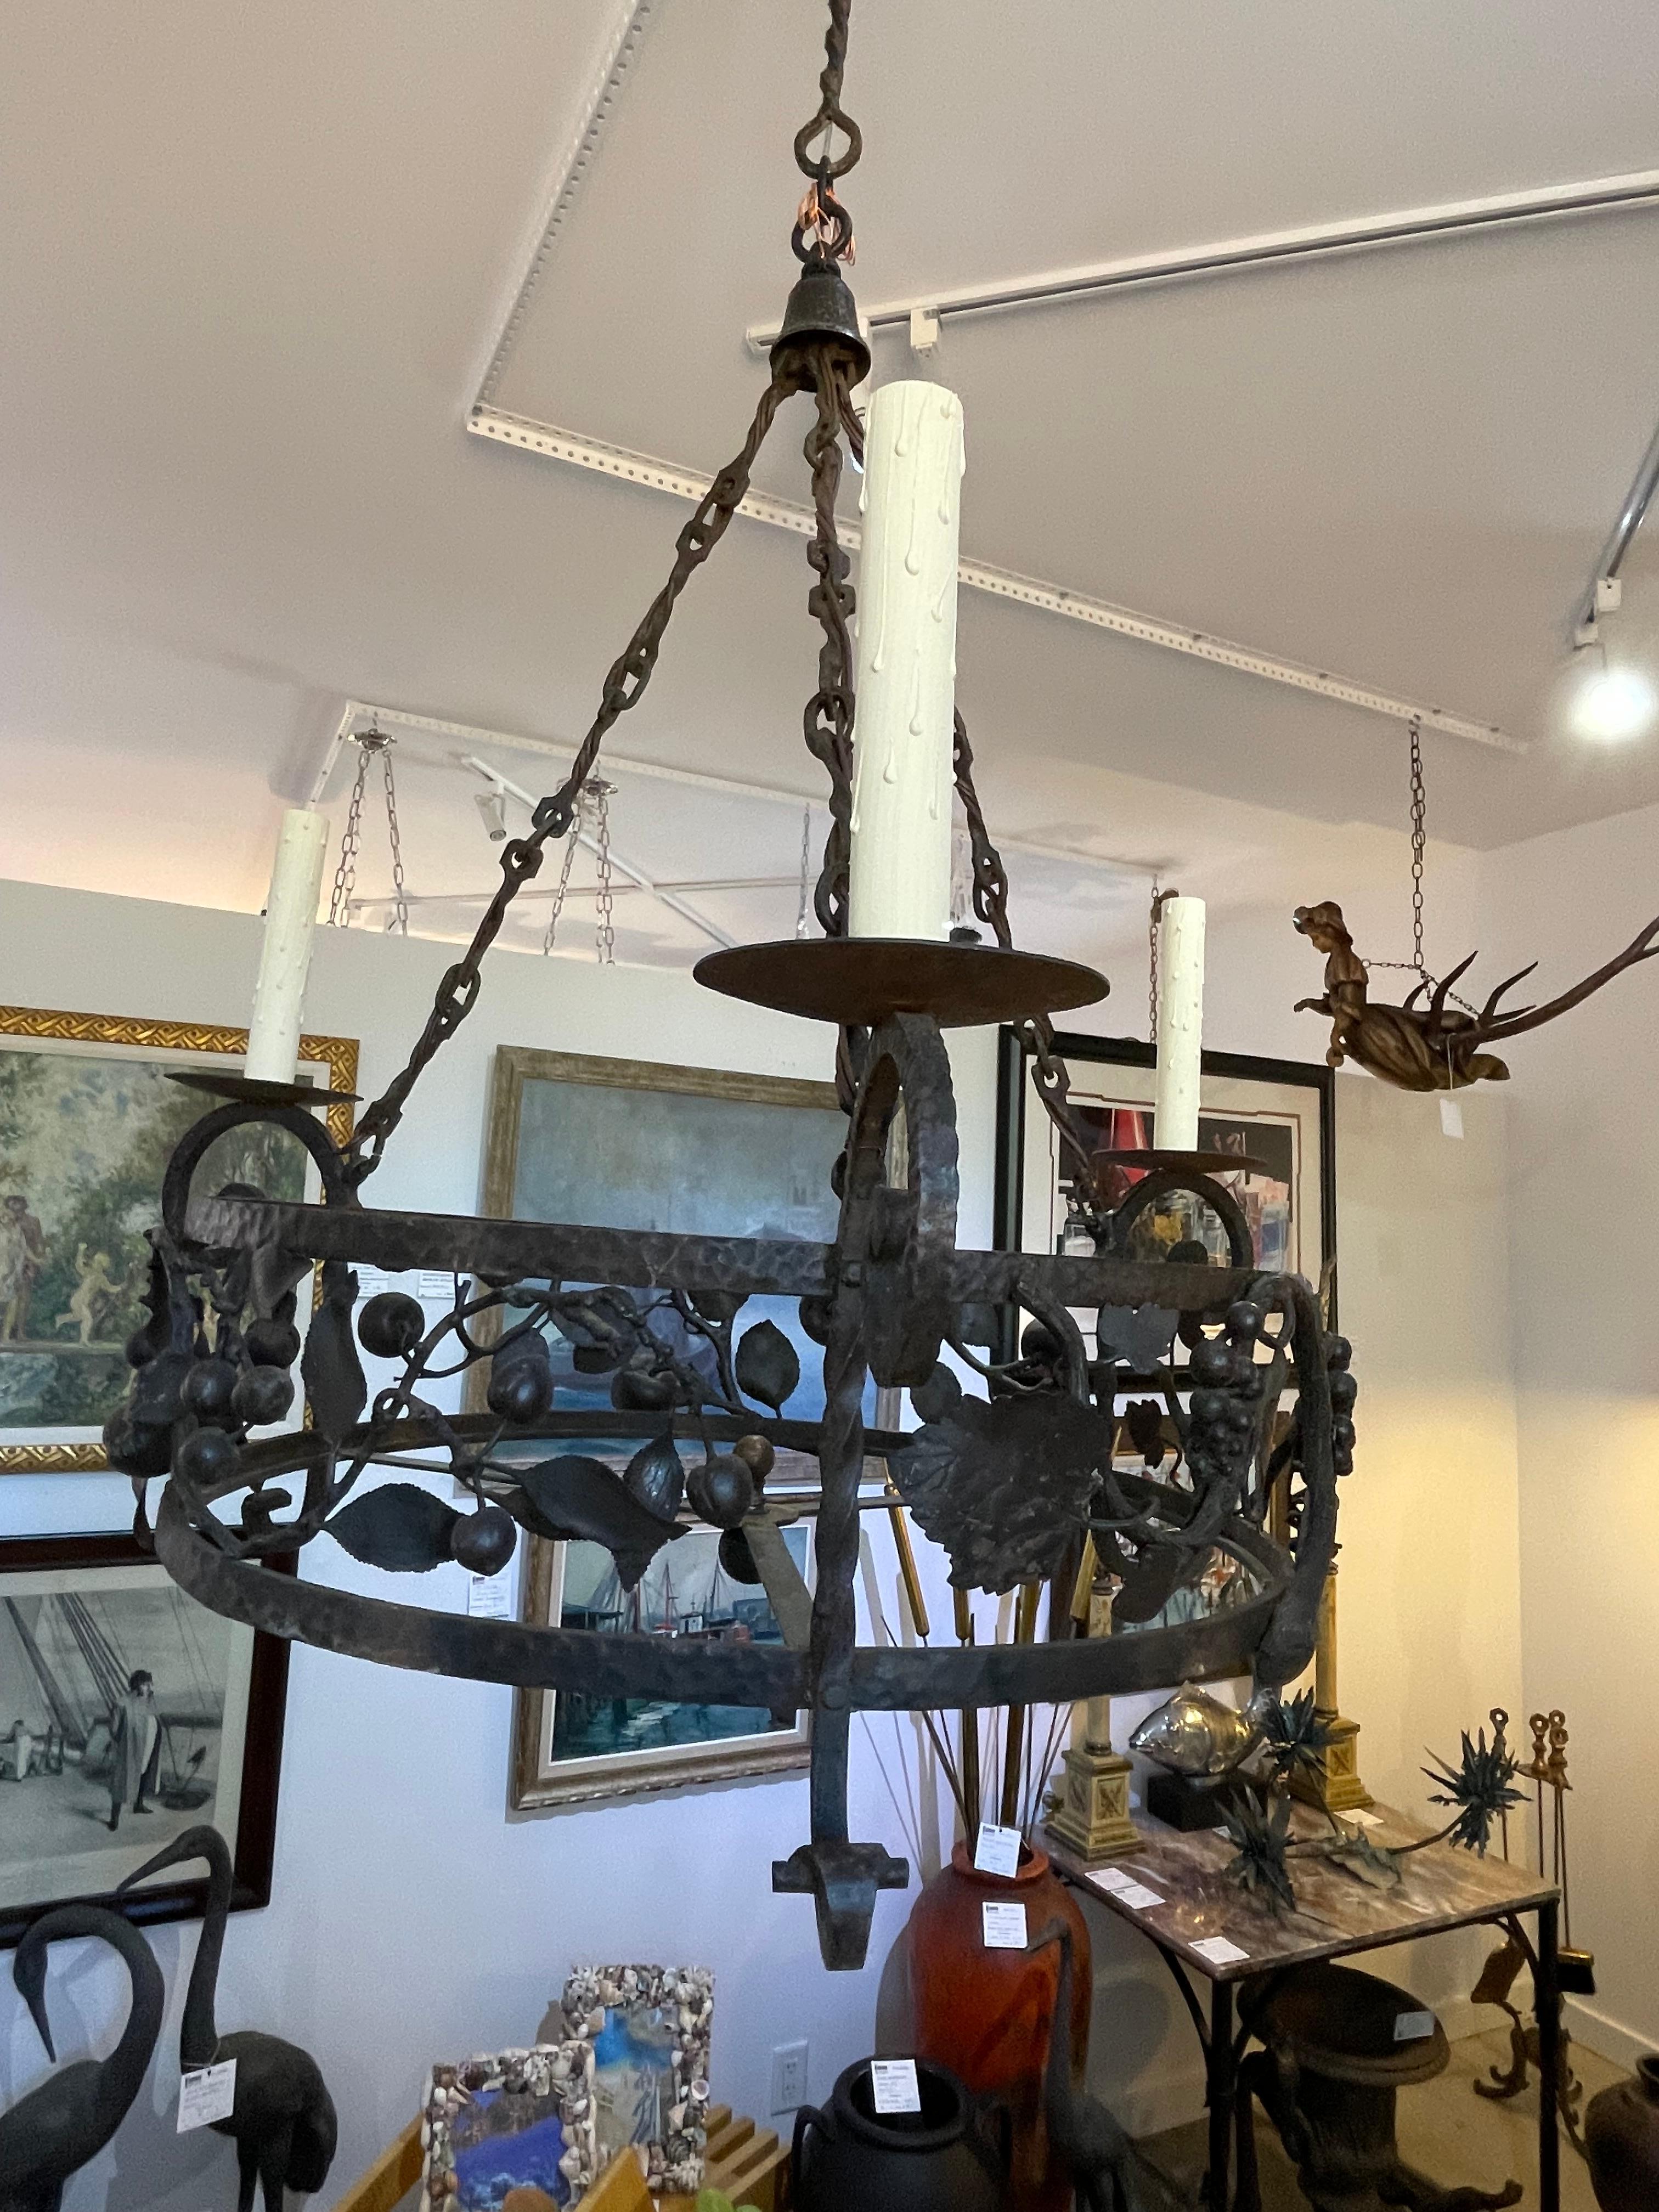 Wrought Iron Addison Mizner Attributed Spanish Colonial Revival Chandelier For Sale